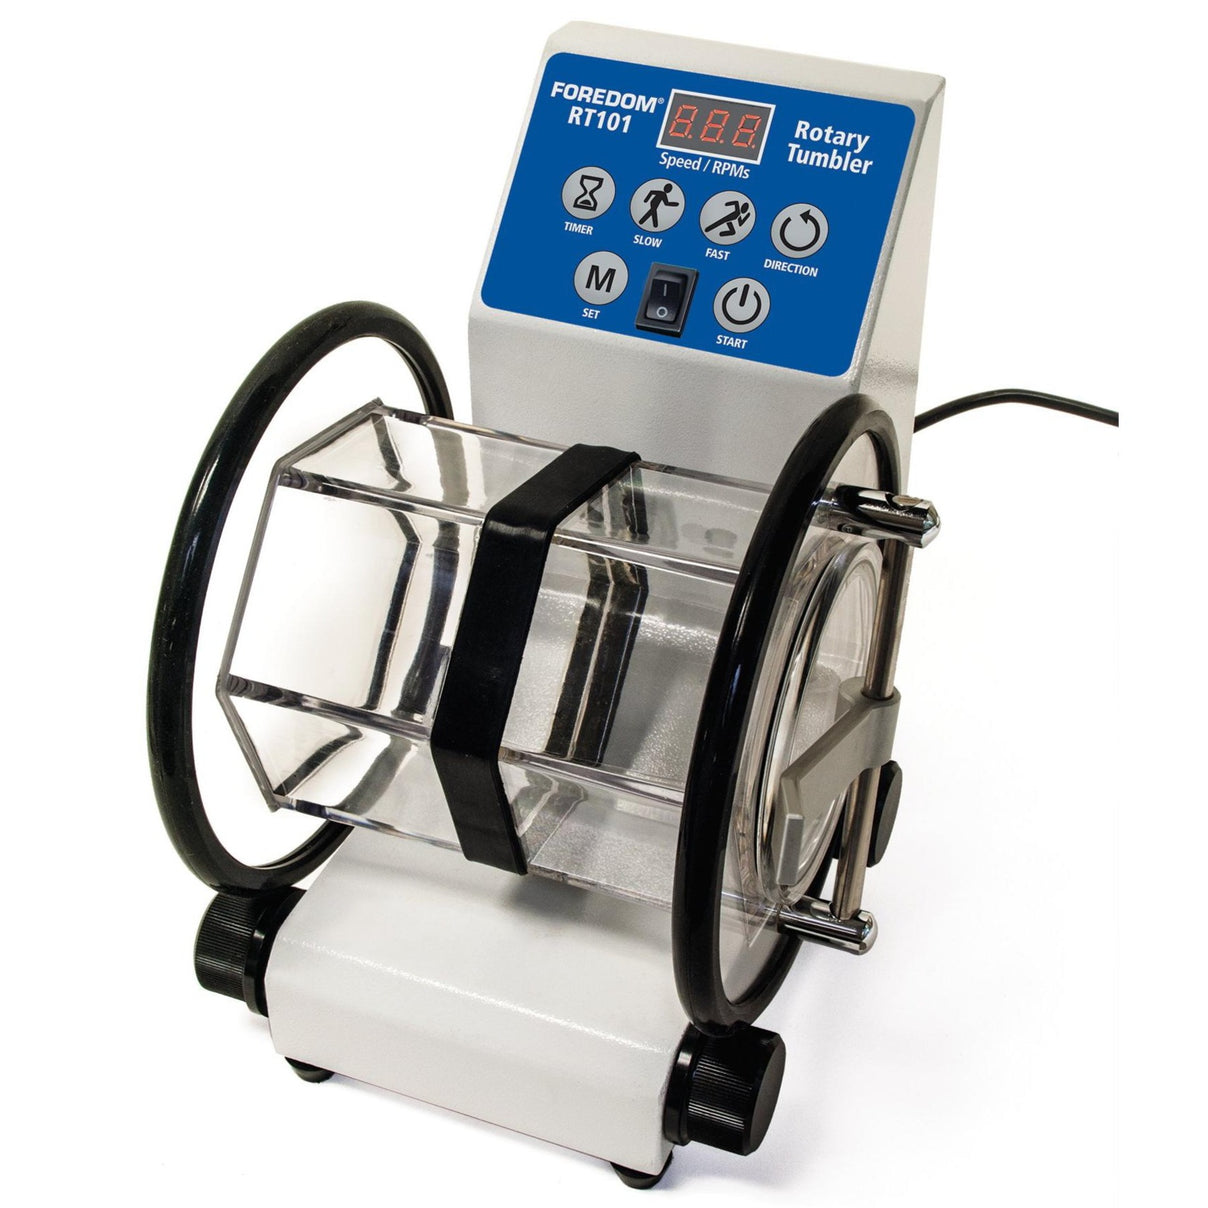 Rotary Tumbler w/ Digital Read Out FOREDOM-Pepetools